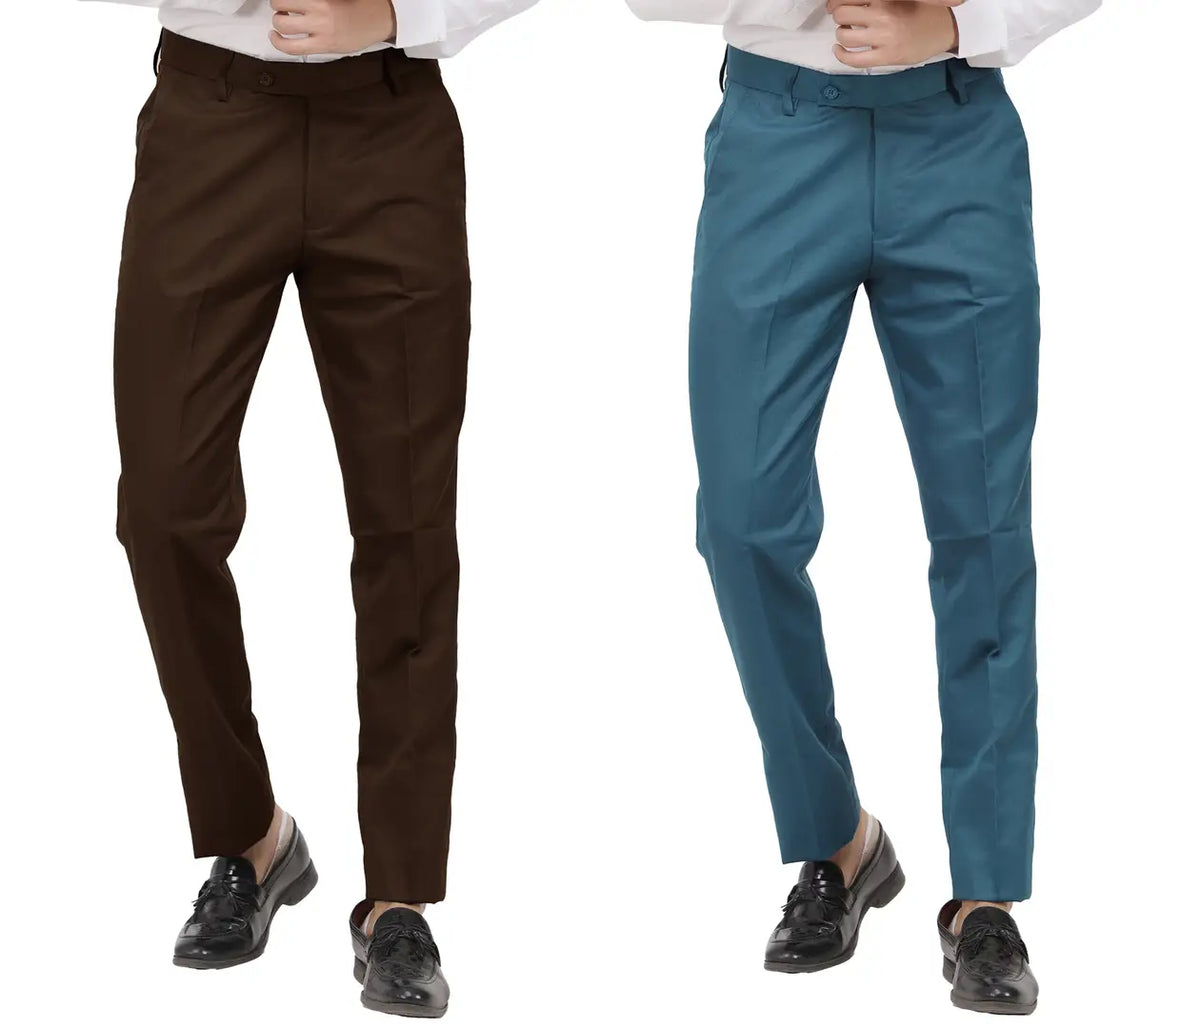 Kundan Men Poly-Viscose Blended Dark Brown and Morpich Blue Formal Trousers ( Pack of 2 Trousers )